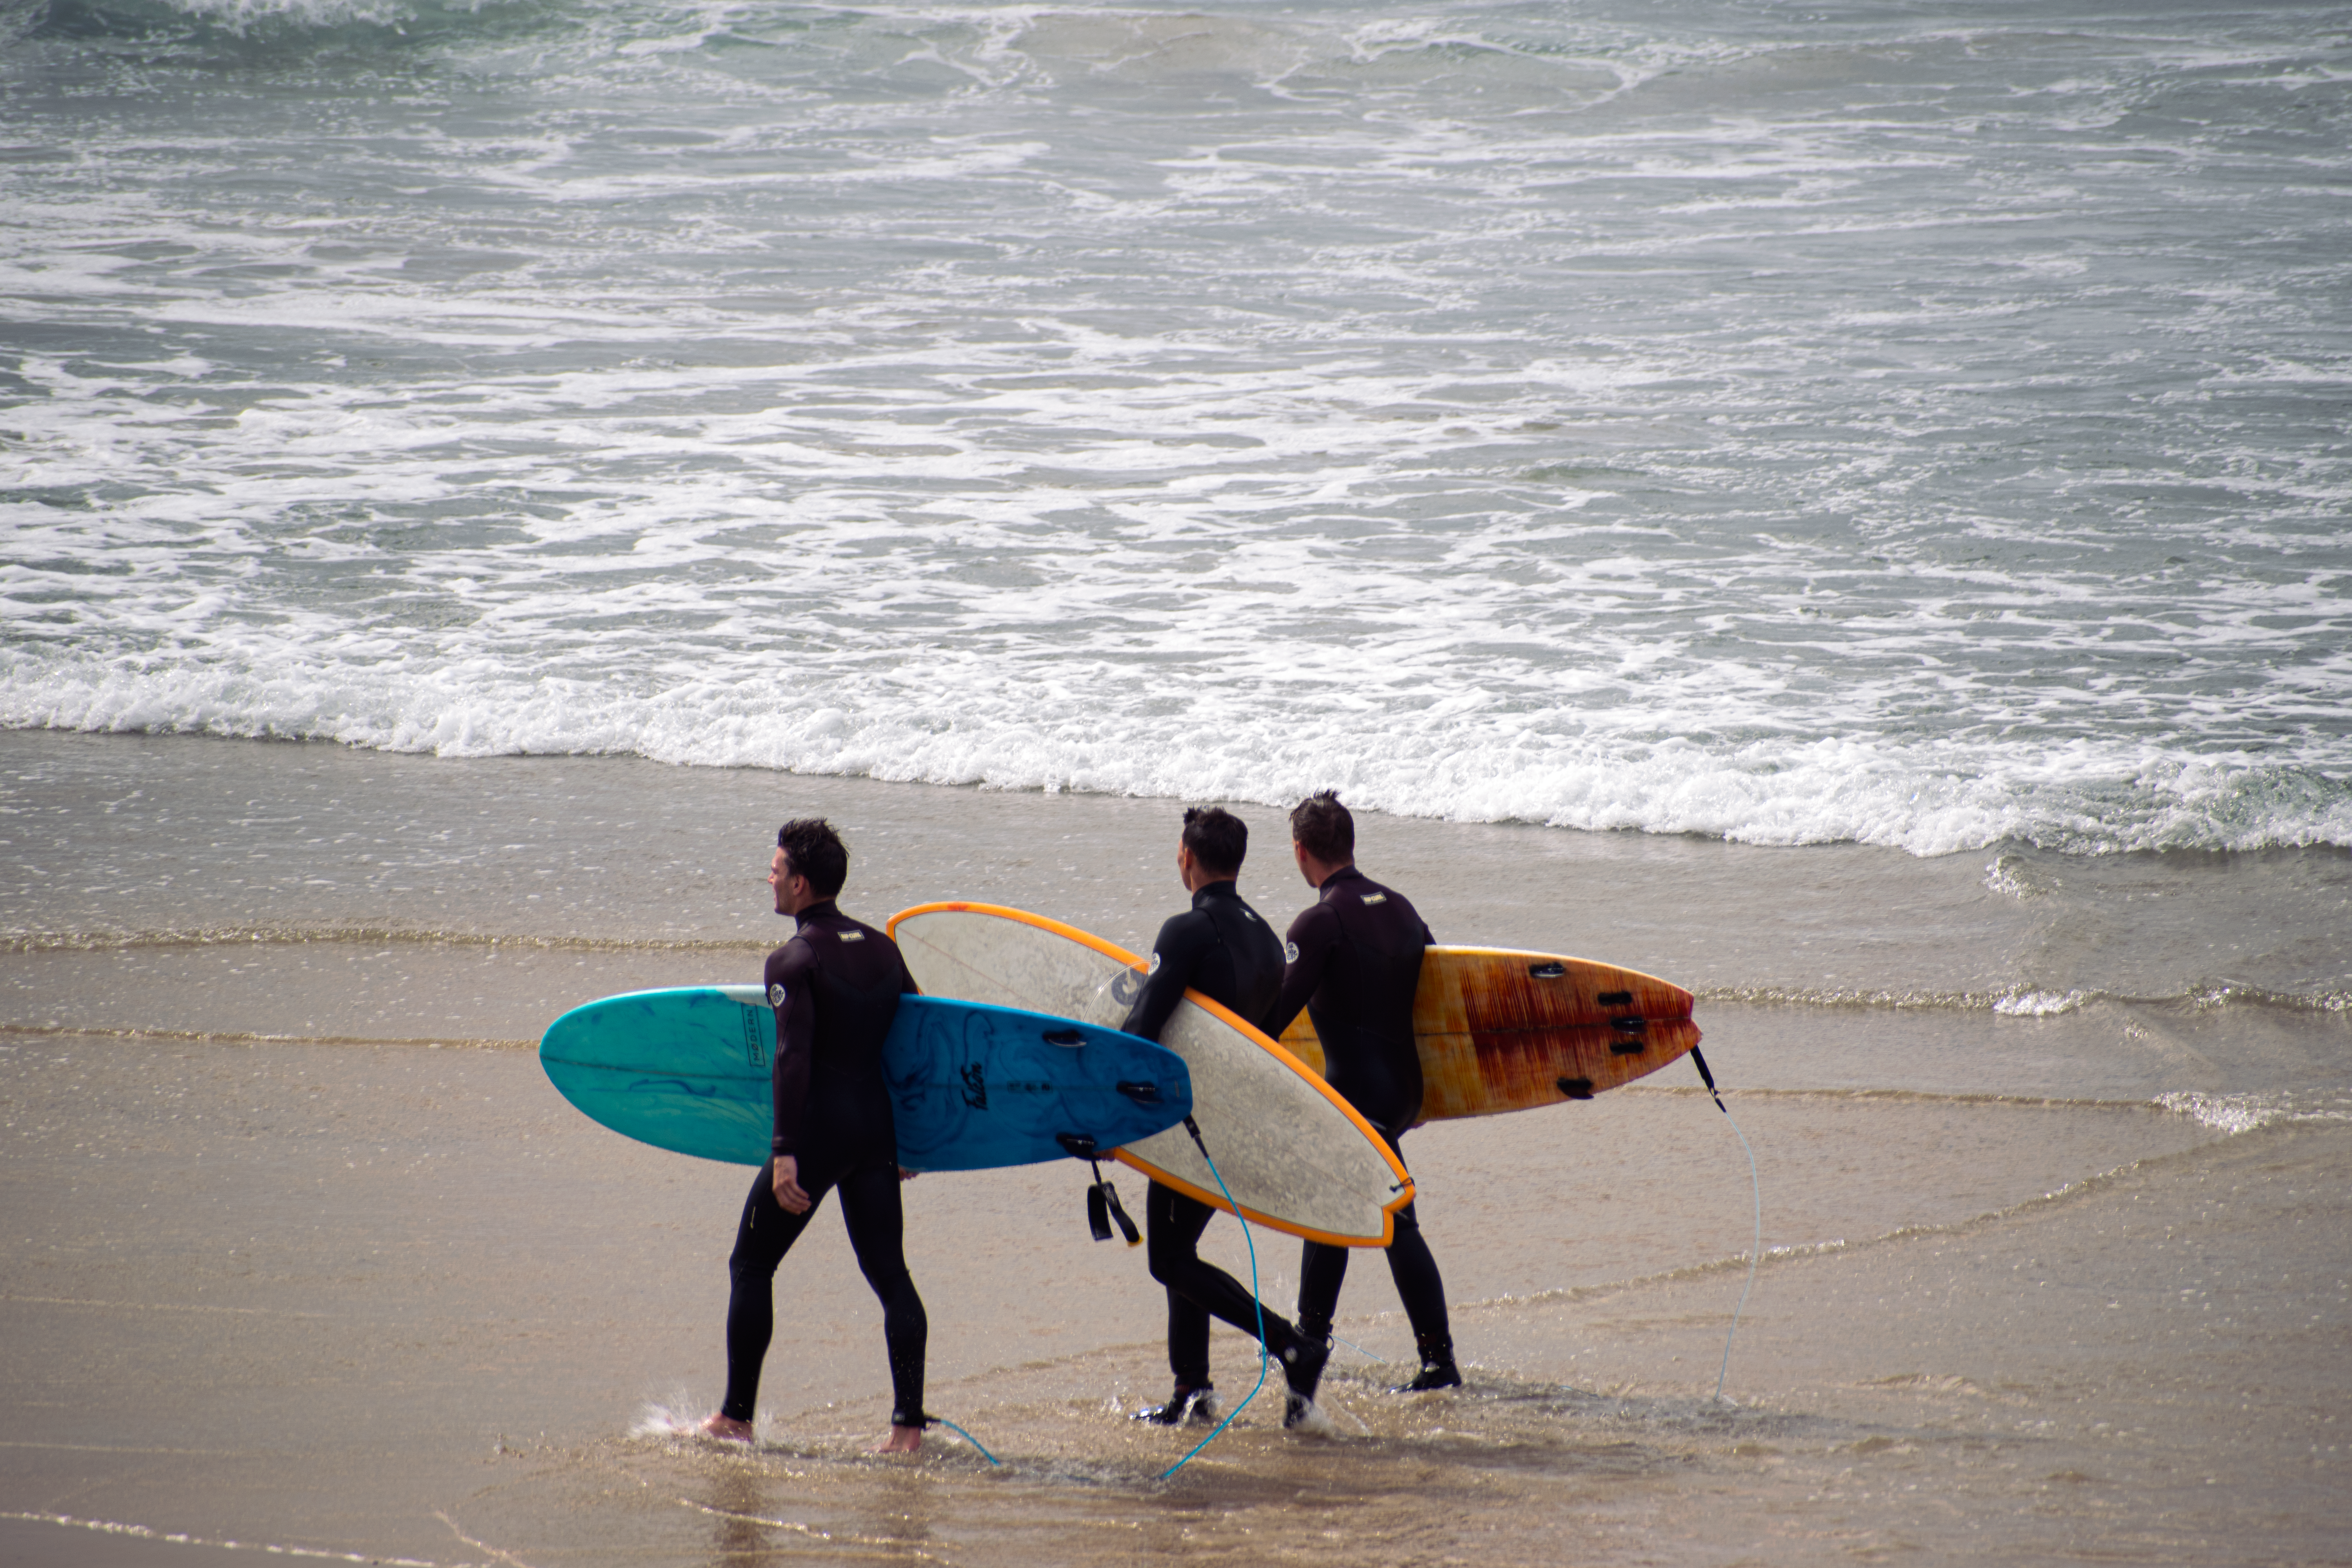 A photo of surfer dudes on the beach.